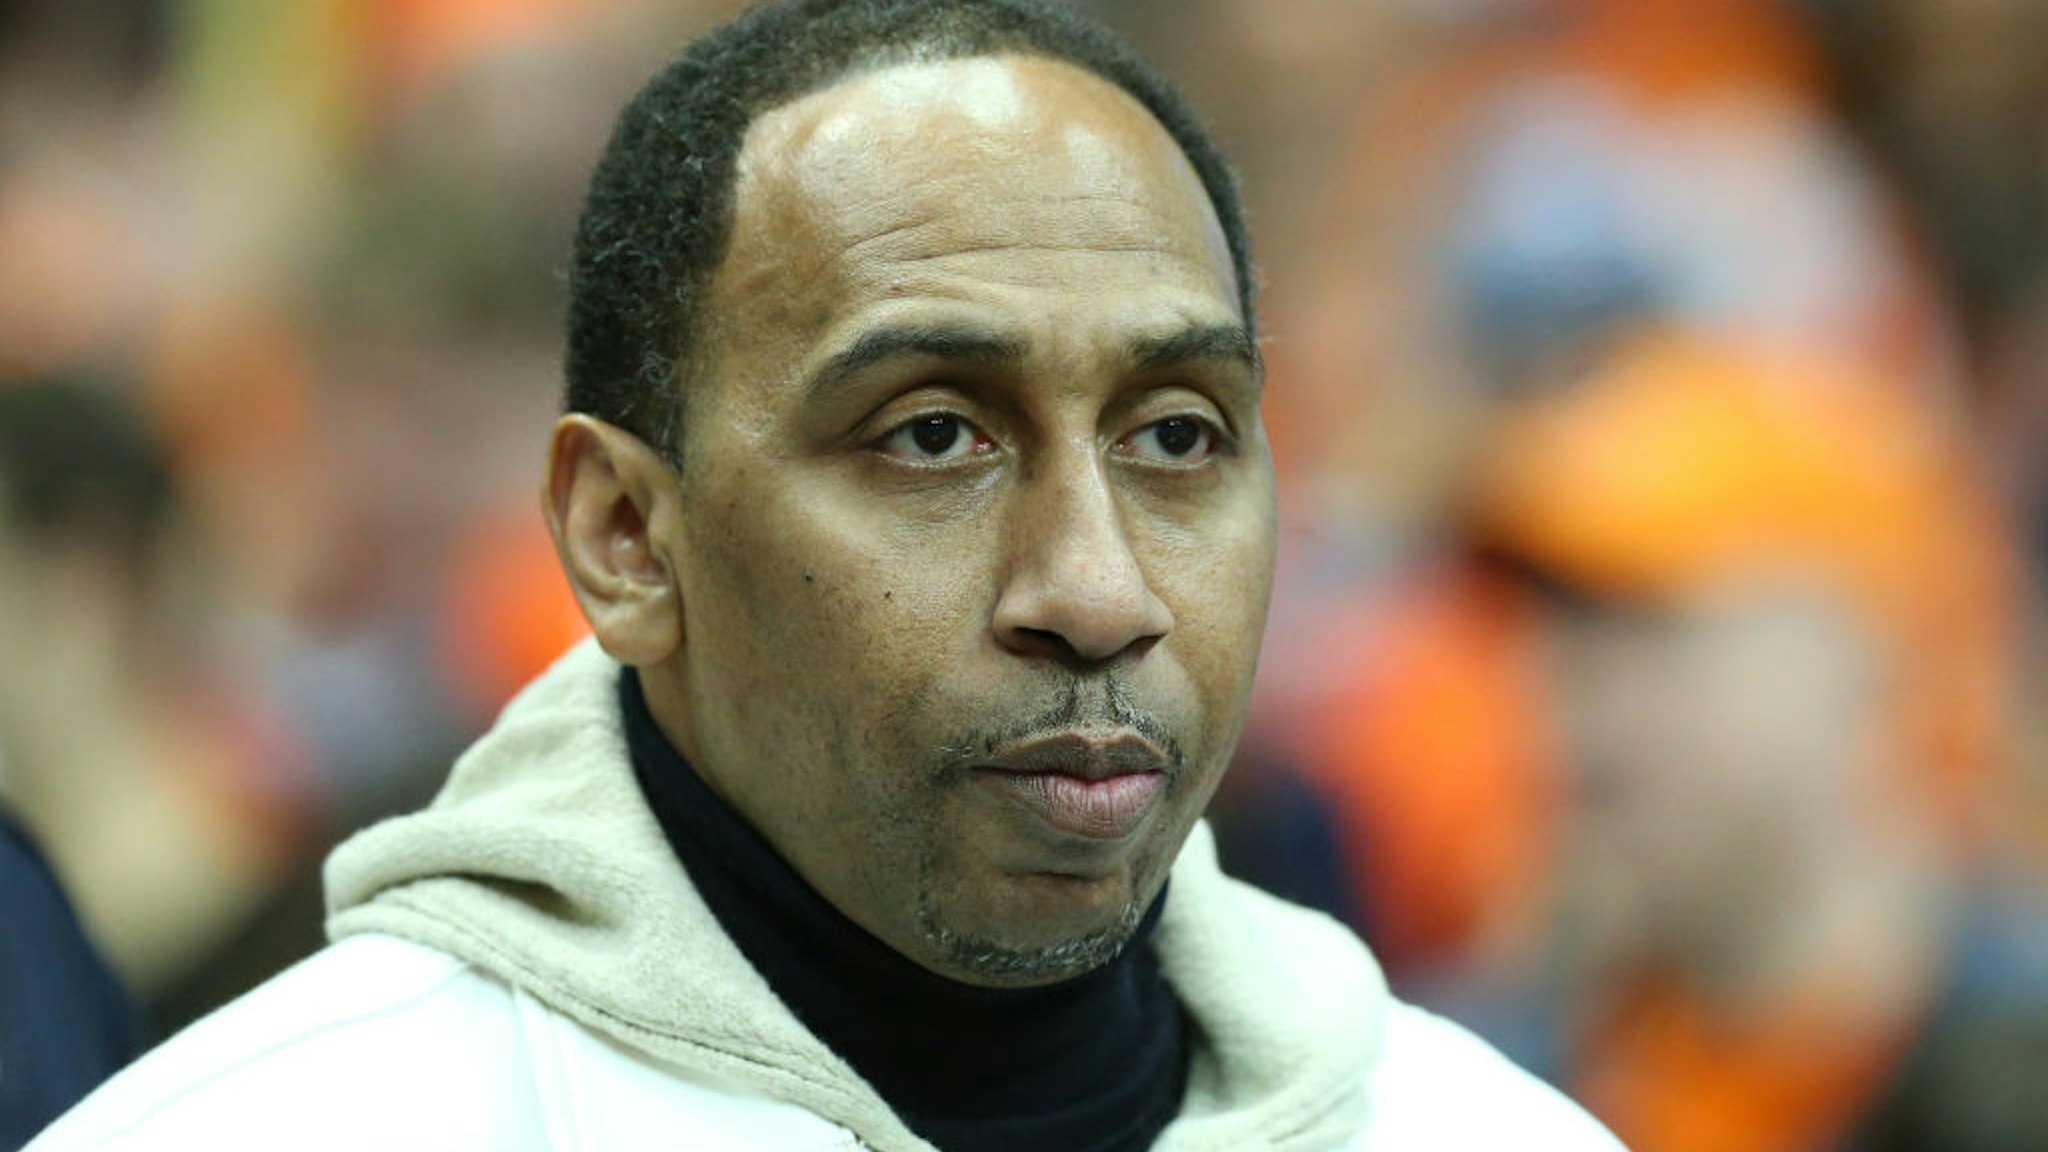 SYRACUSE, NY - FEBRUARY 23: ESPN host Stephen A. Smith looks on prior to the game between the Duke Blue Devils and the Syracuse Orange at the Carrier Dome on February 23, 2019 in Syracuse, New York. Duke defeated Syracuse 75-65. (Photo by Rich Barnes/Getty Images)